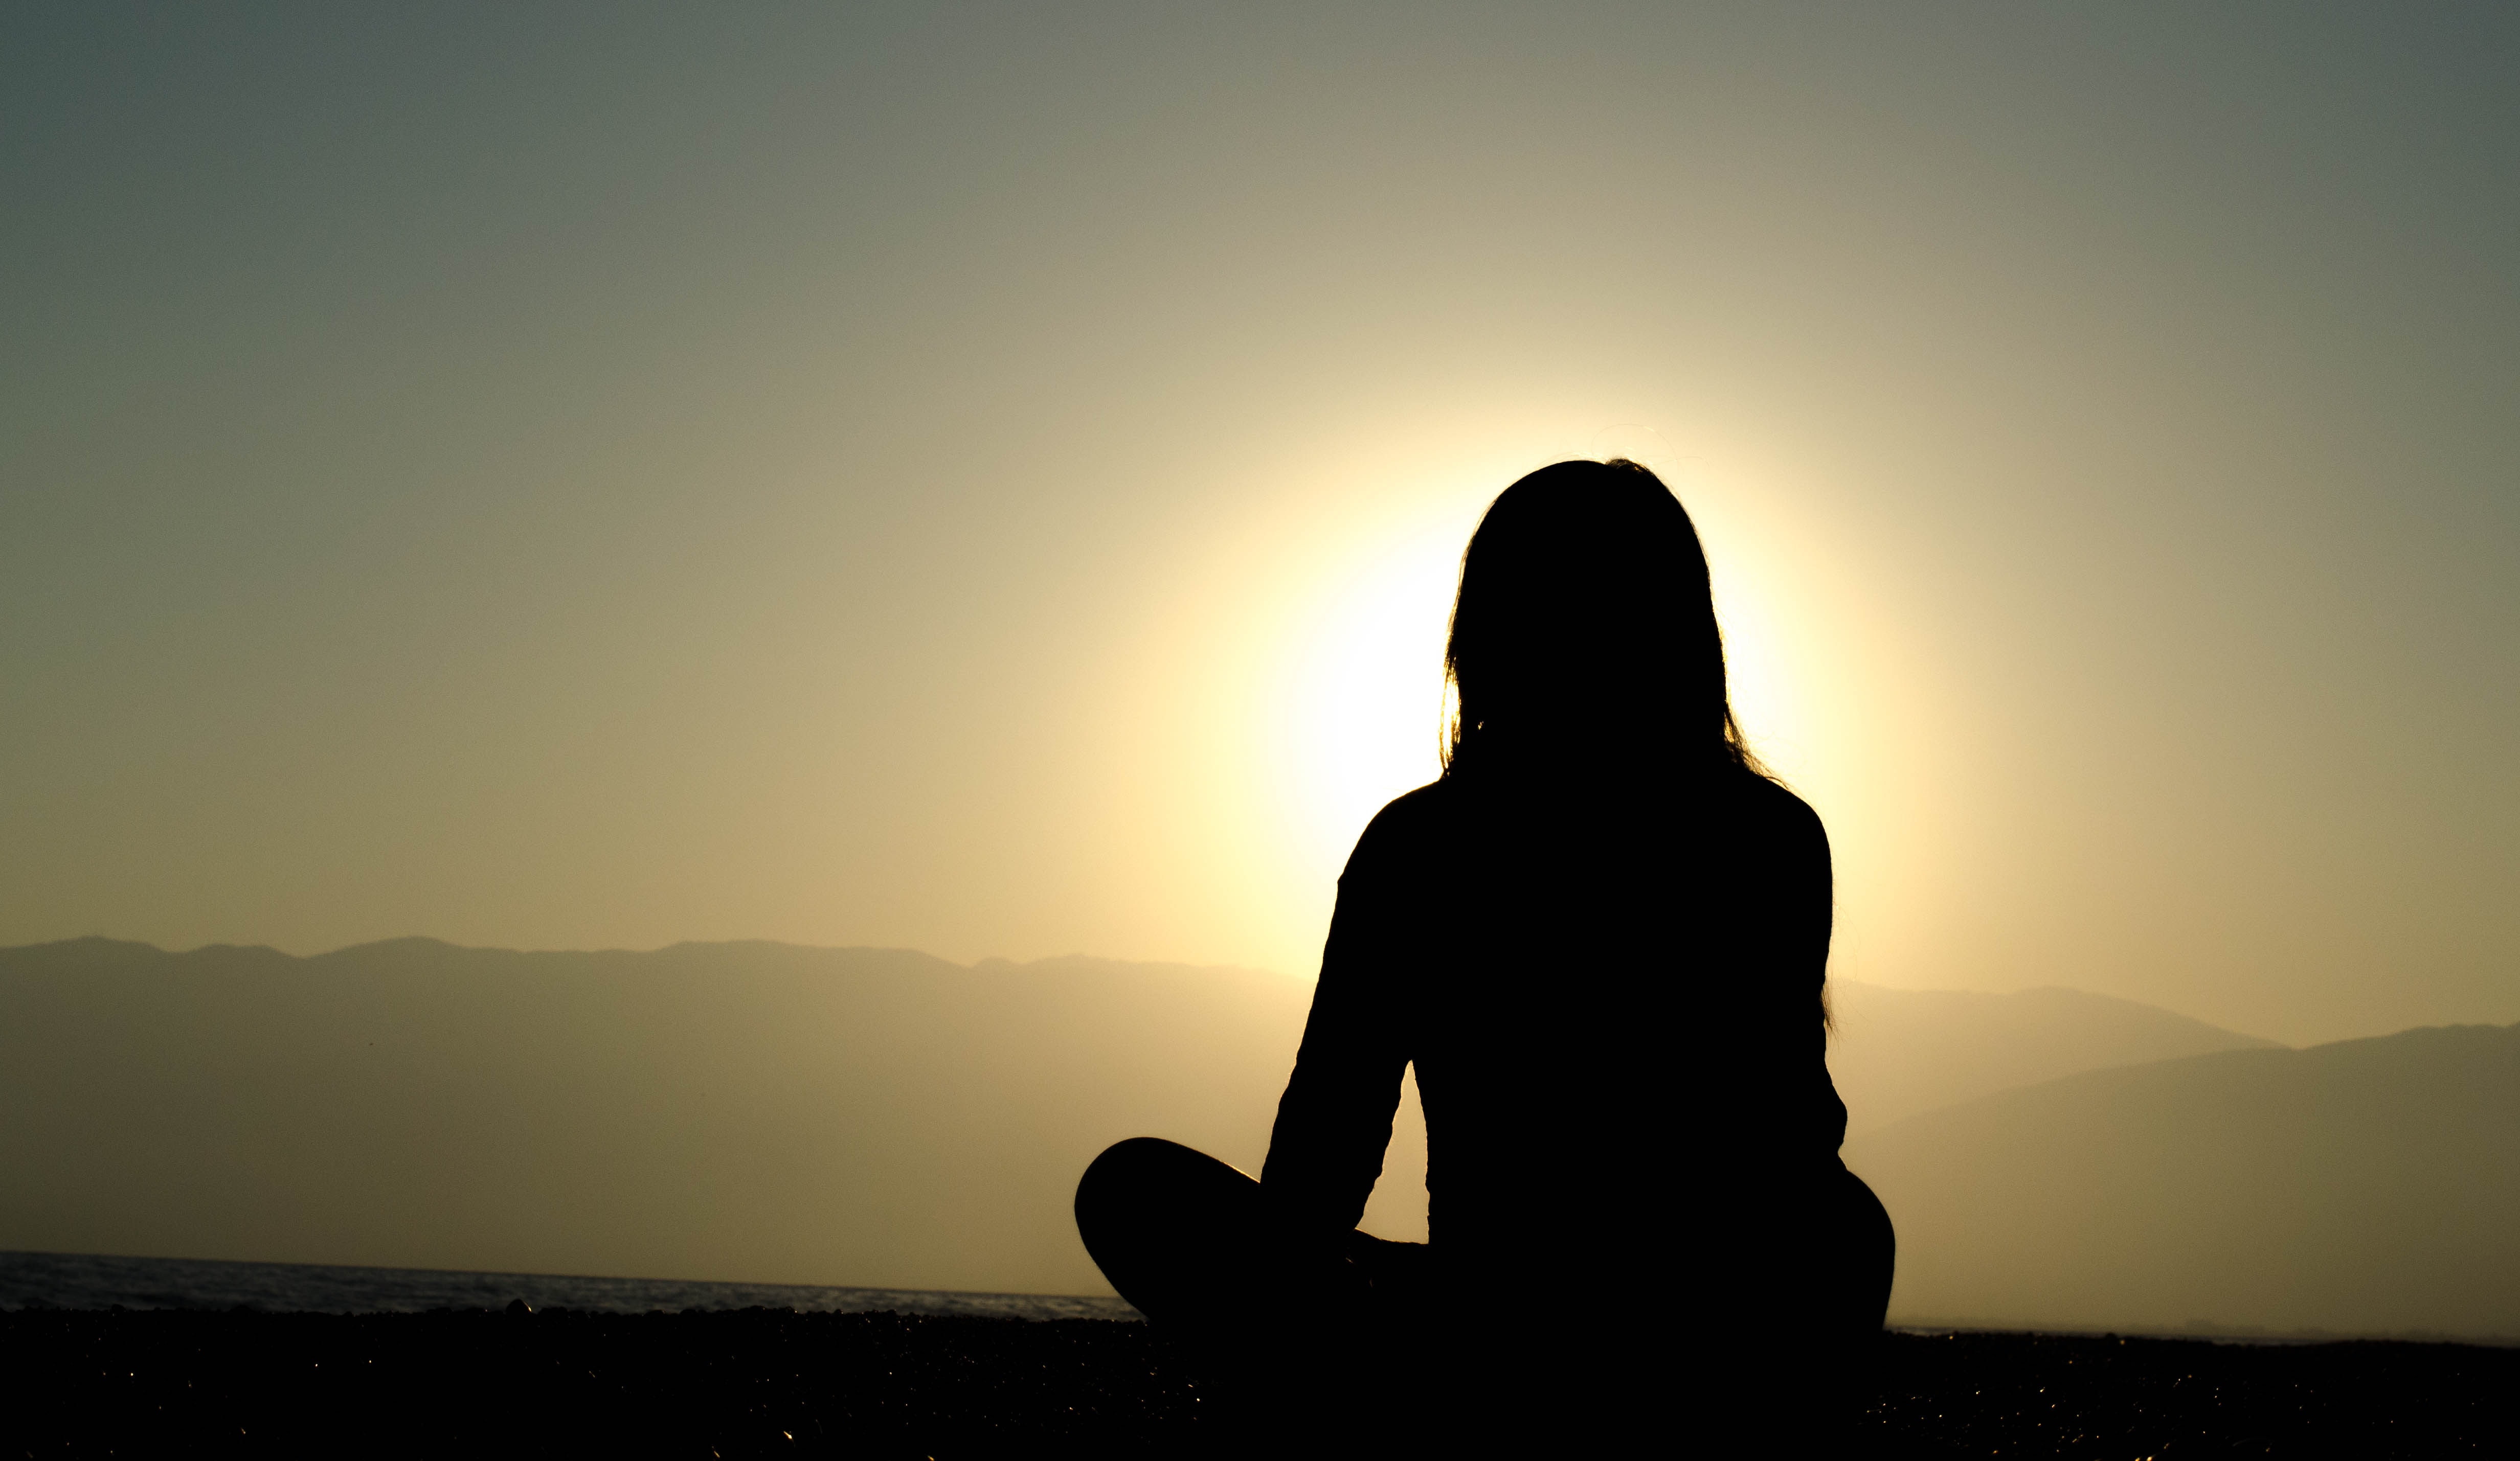 Silhouette of a lone woman looking at the sunset over mountains